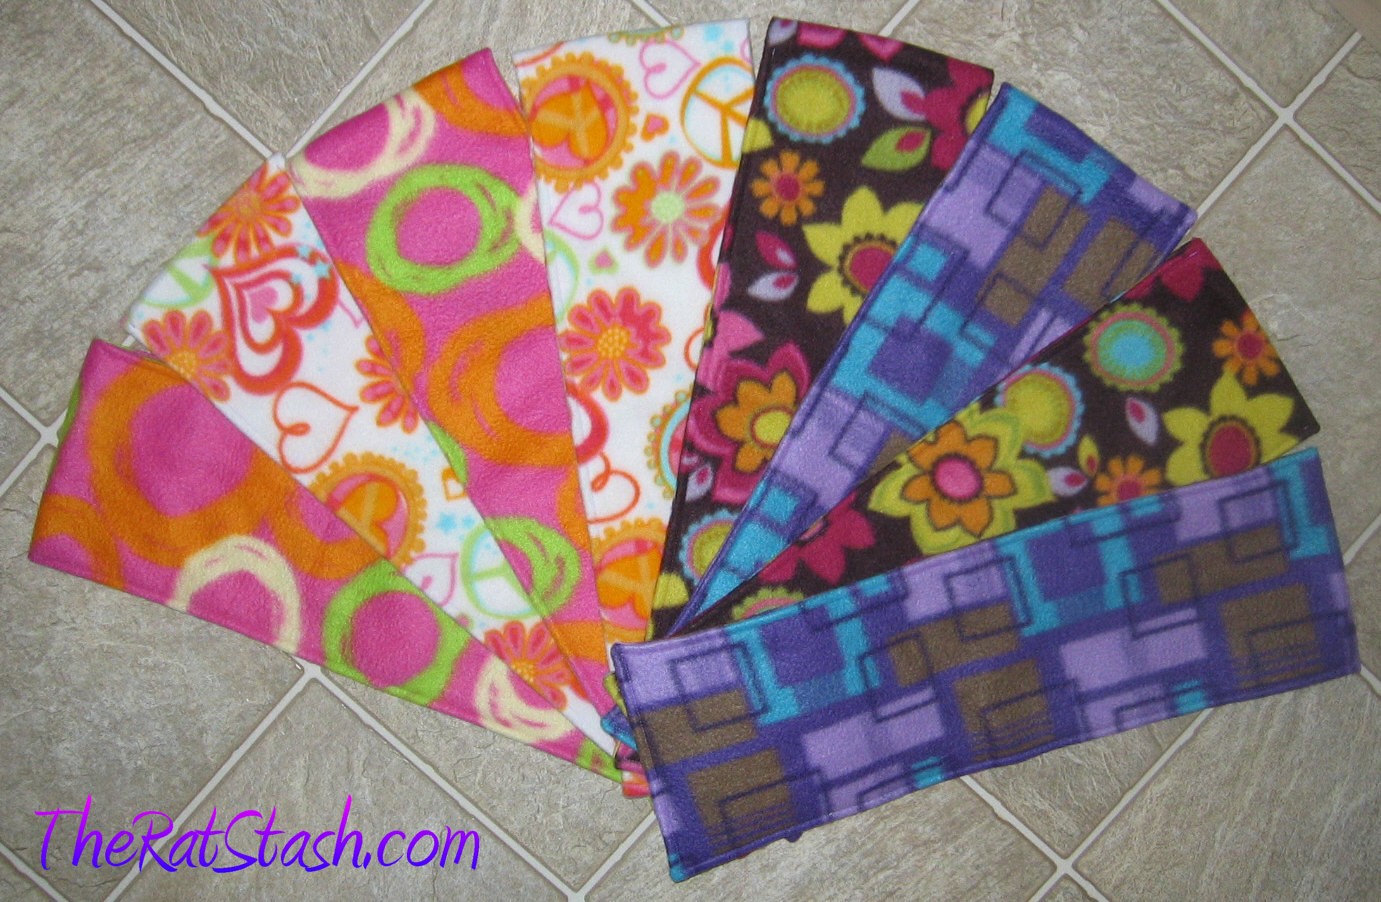 For Mercedes: 8 FN/CN Ramp Covers in "surprise girl" fabrics